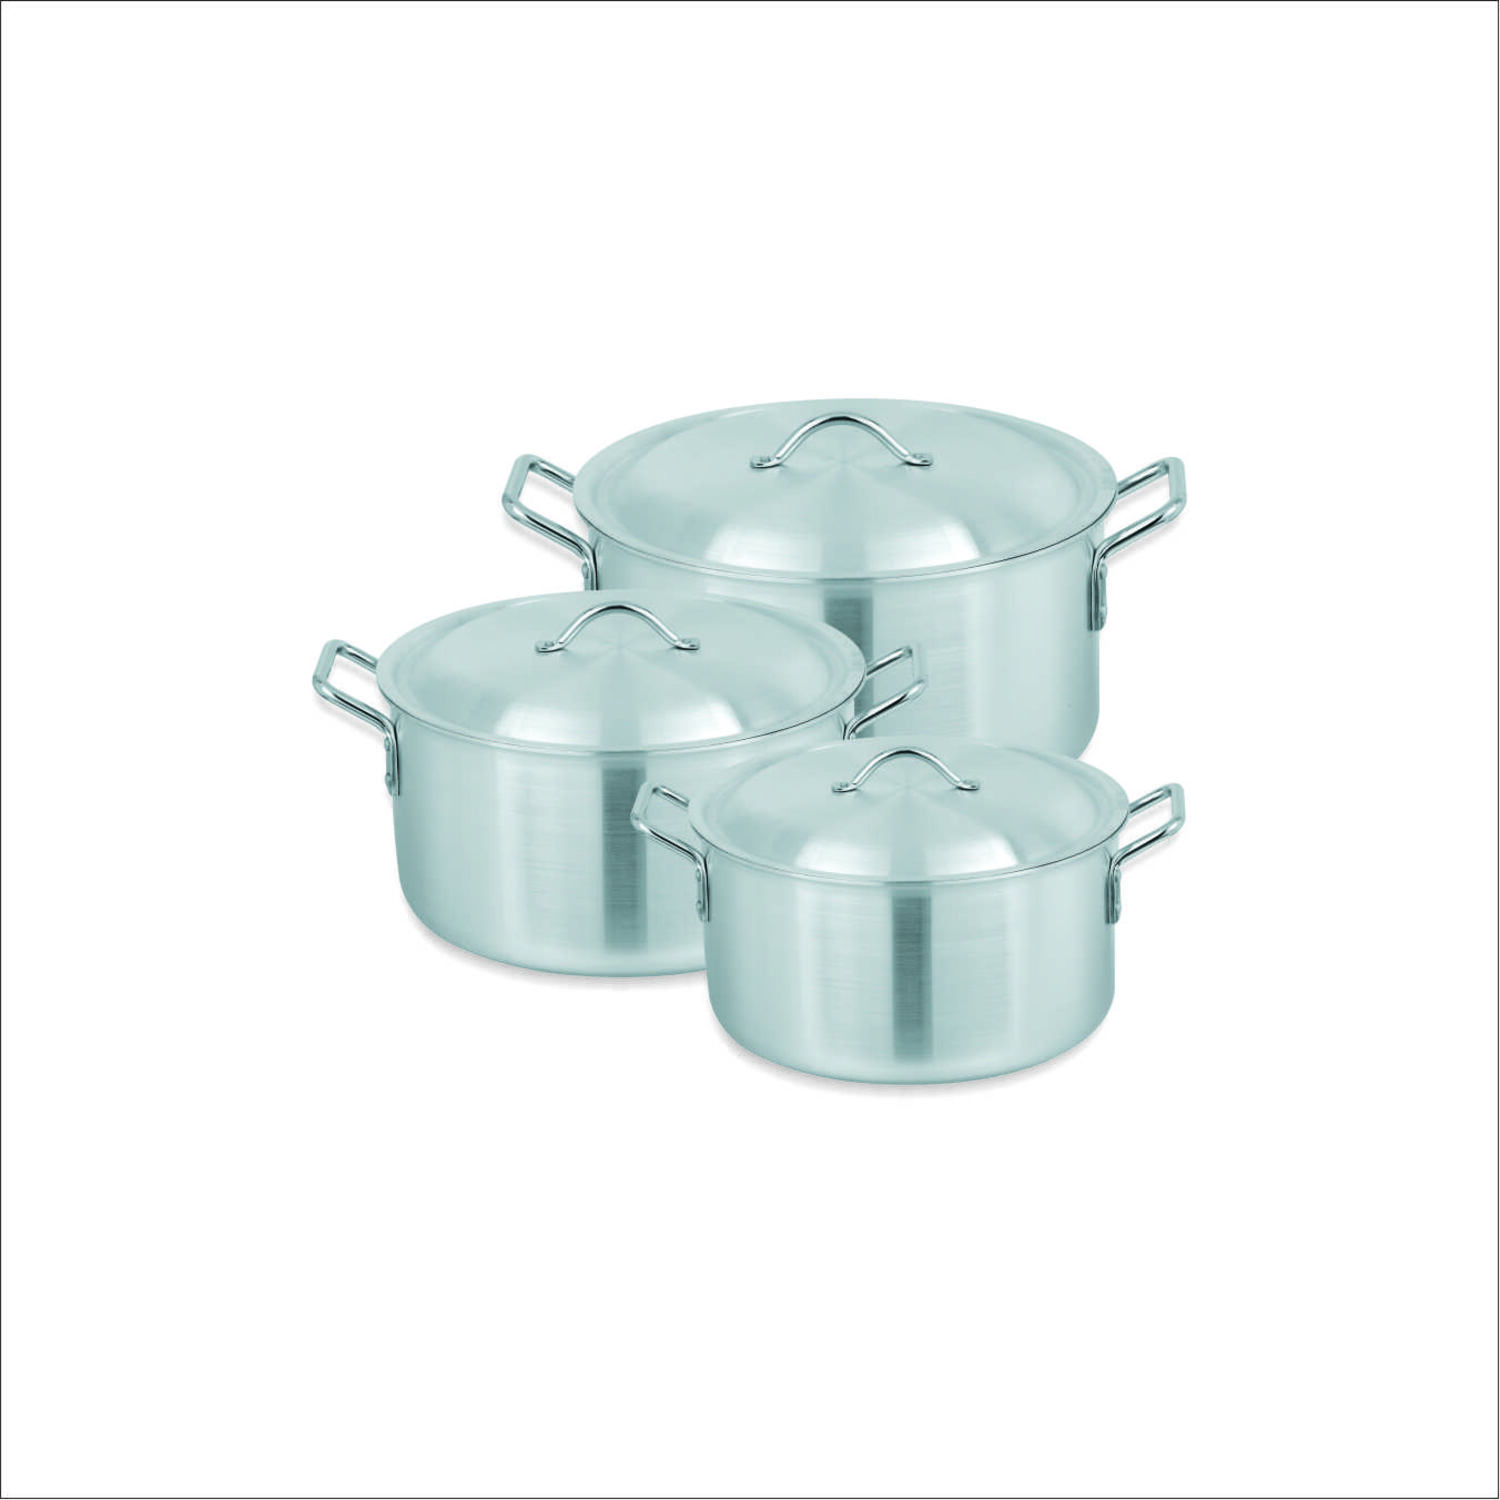 Heavy Metal Finish Easy To Clean Light Weight Sonex Home Kitchen Cooking Pot 3 Pcs Set 8x10 Size 36/38.5/41 Cm Capacity 18/24/29 Liters With Heavy Durable Lid And Handles Original Made In Pakistan